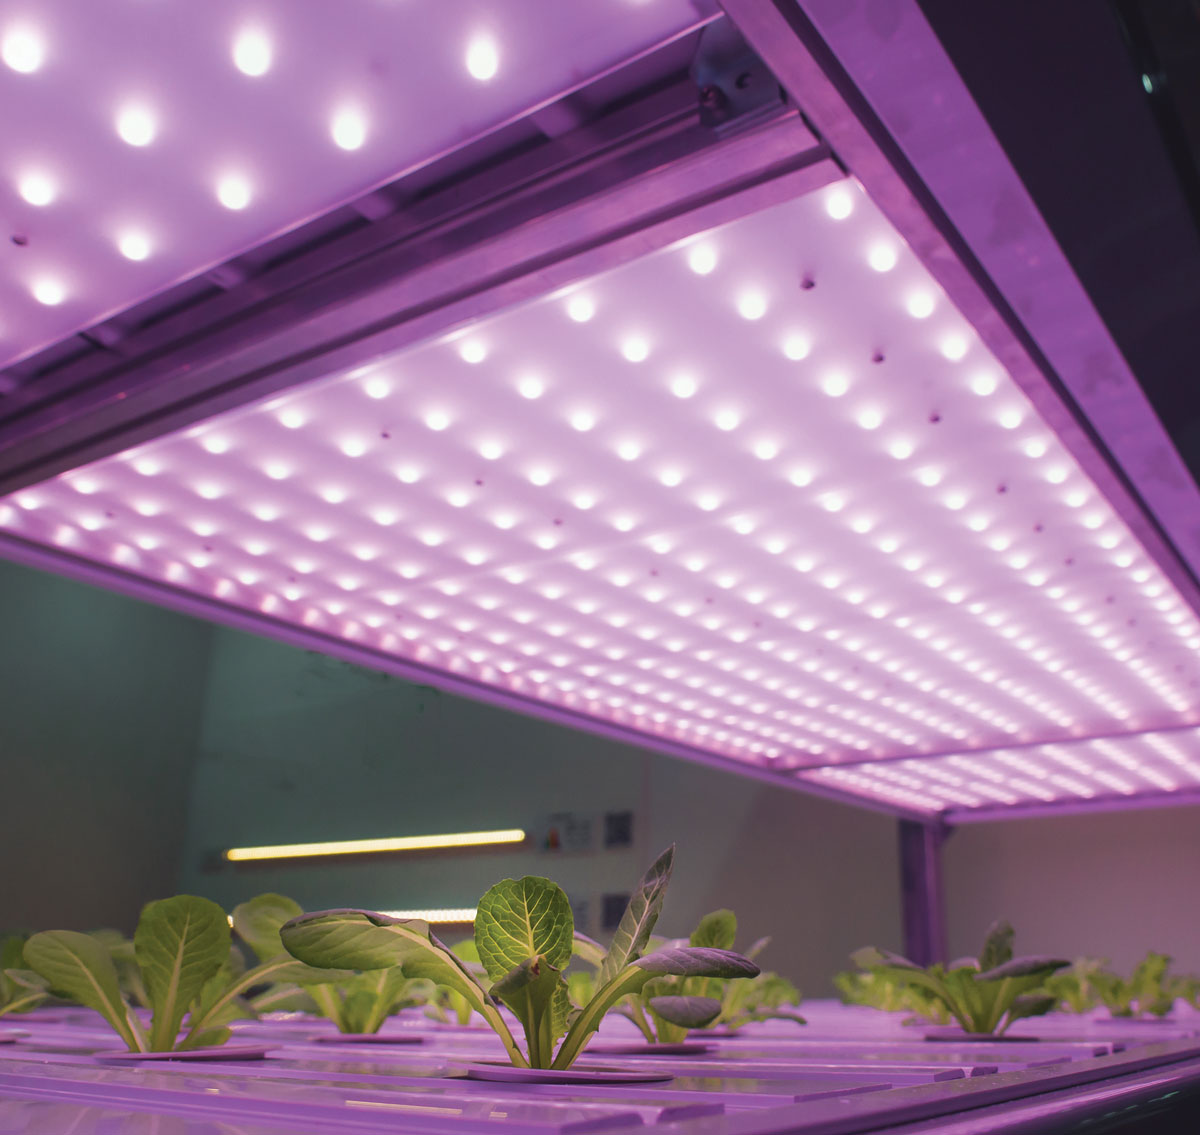 LED “Grow Lights” in use